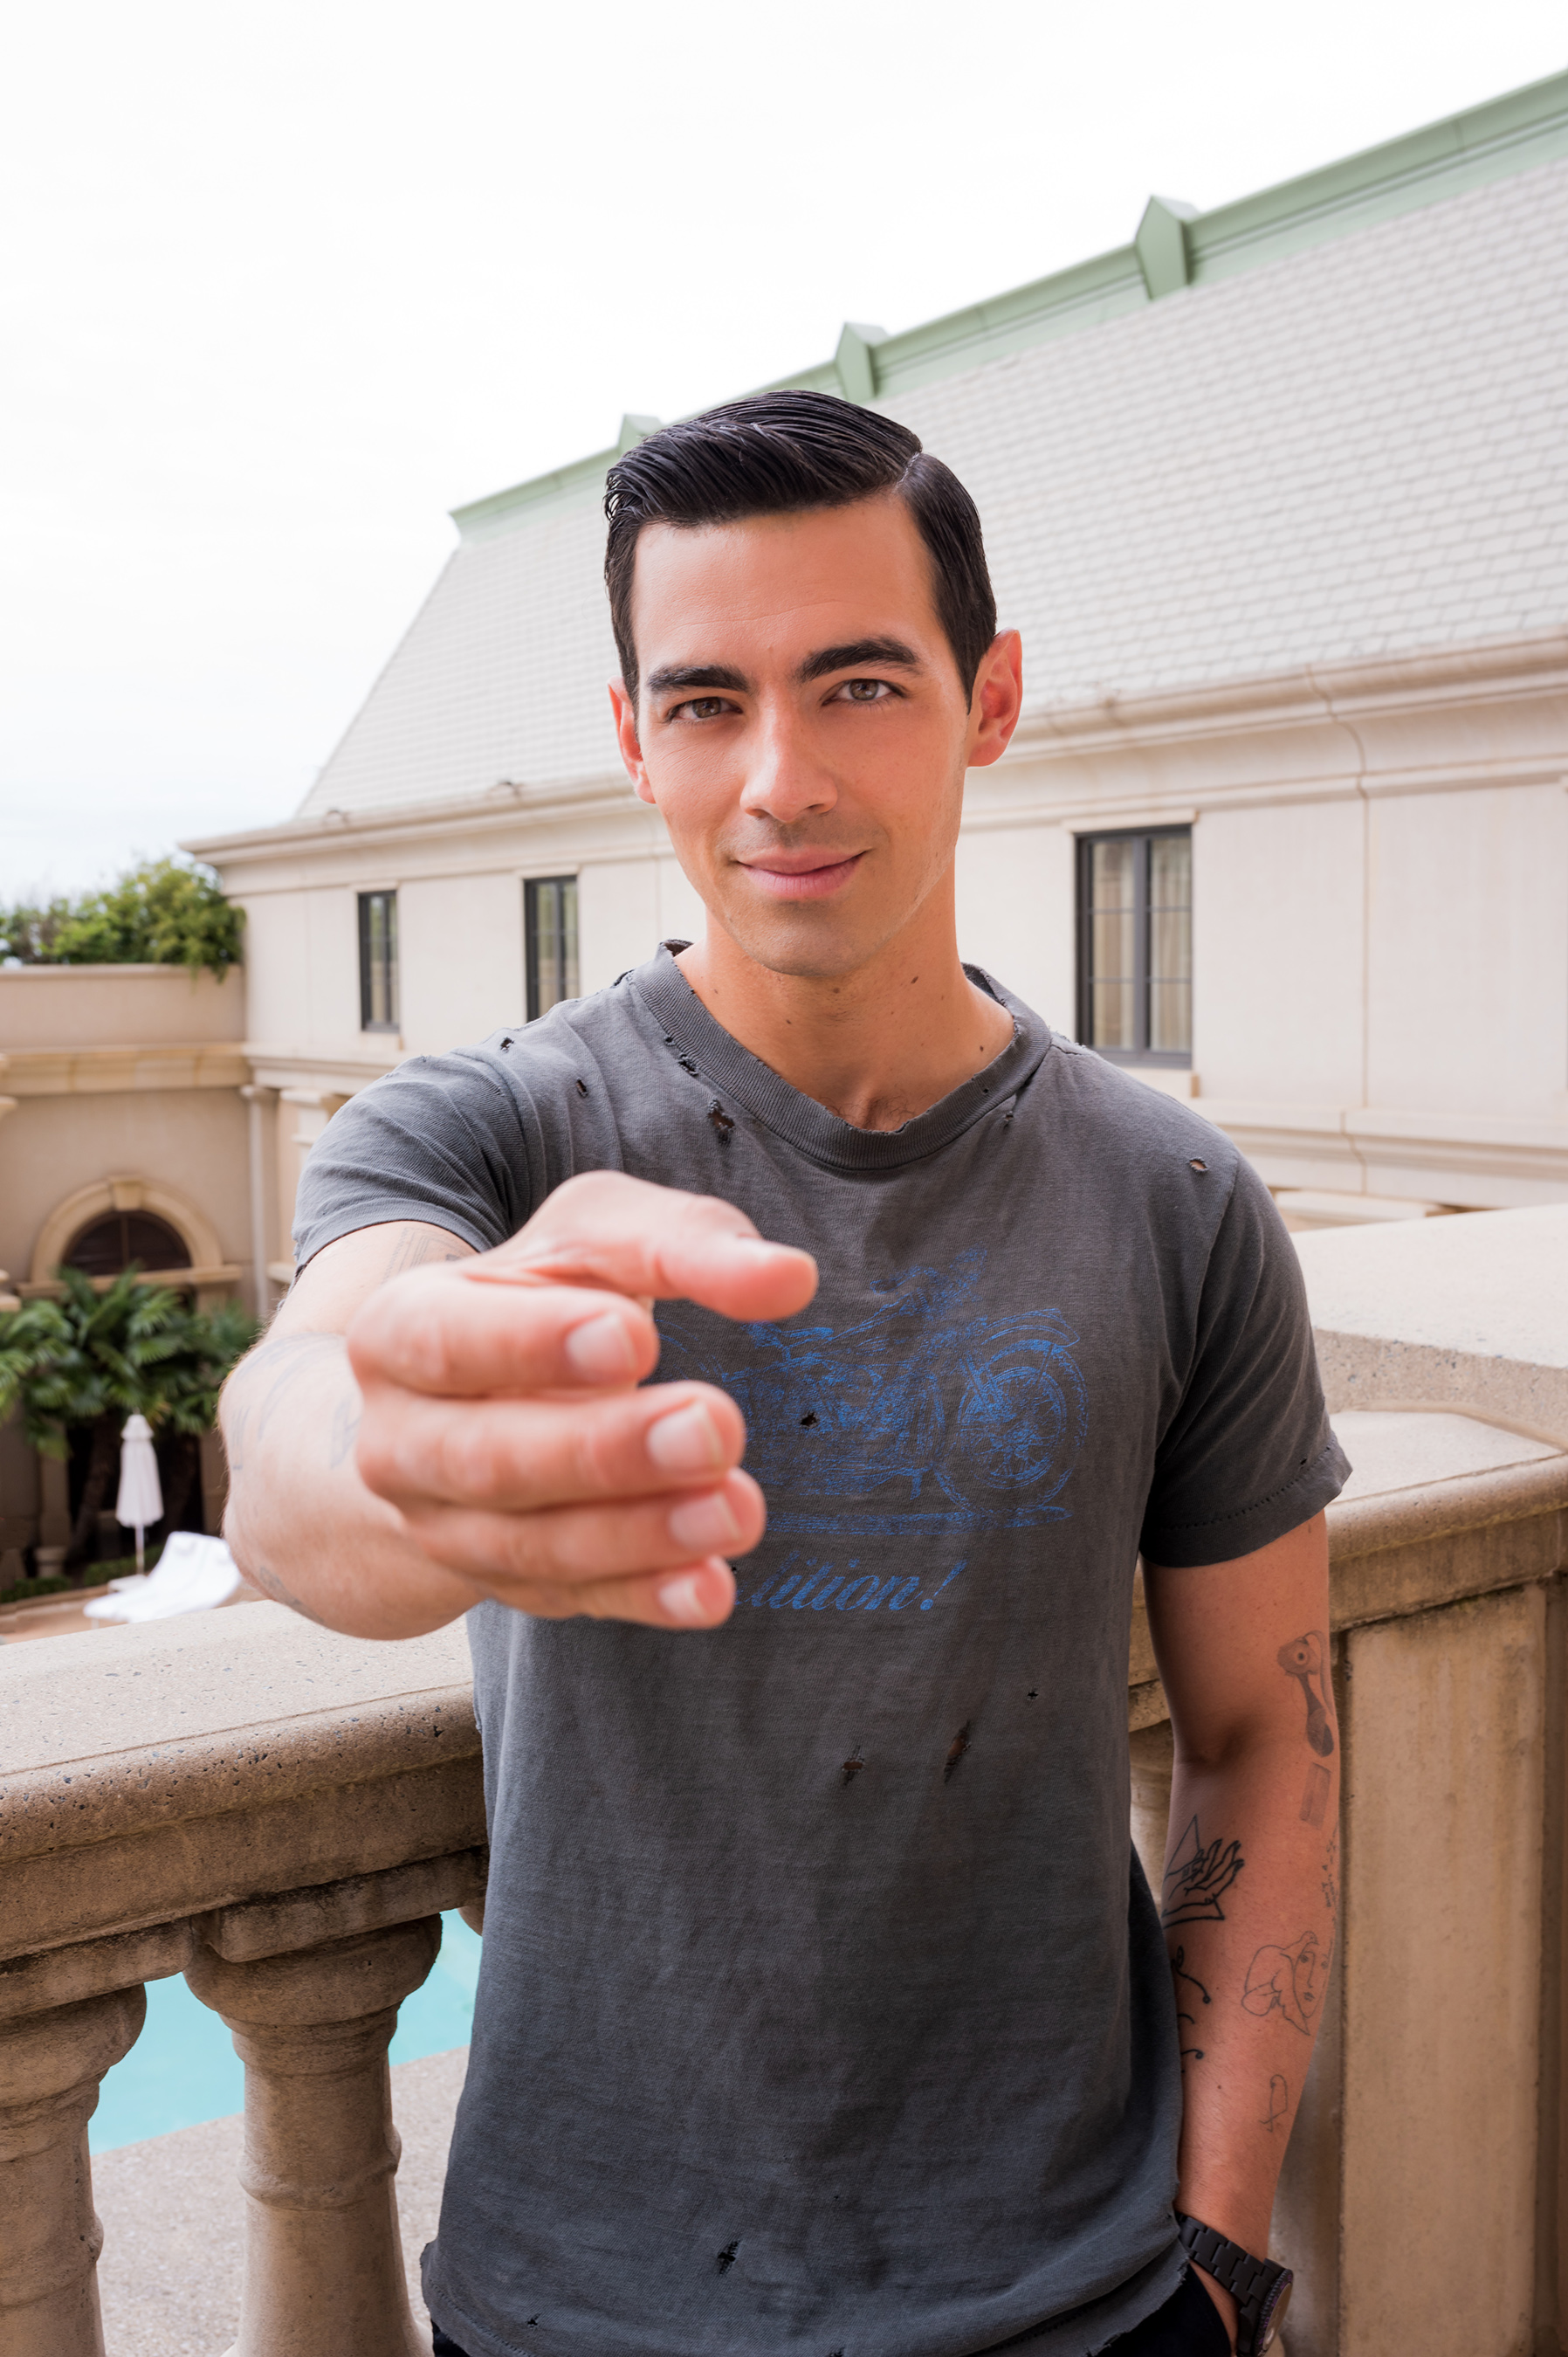 Joe Jonas has teamed up with Expedia to literally offer his hand to travelers as they get ready to travel again